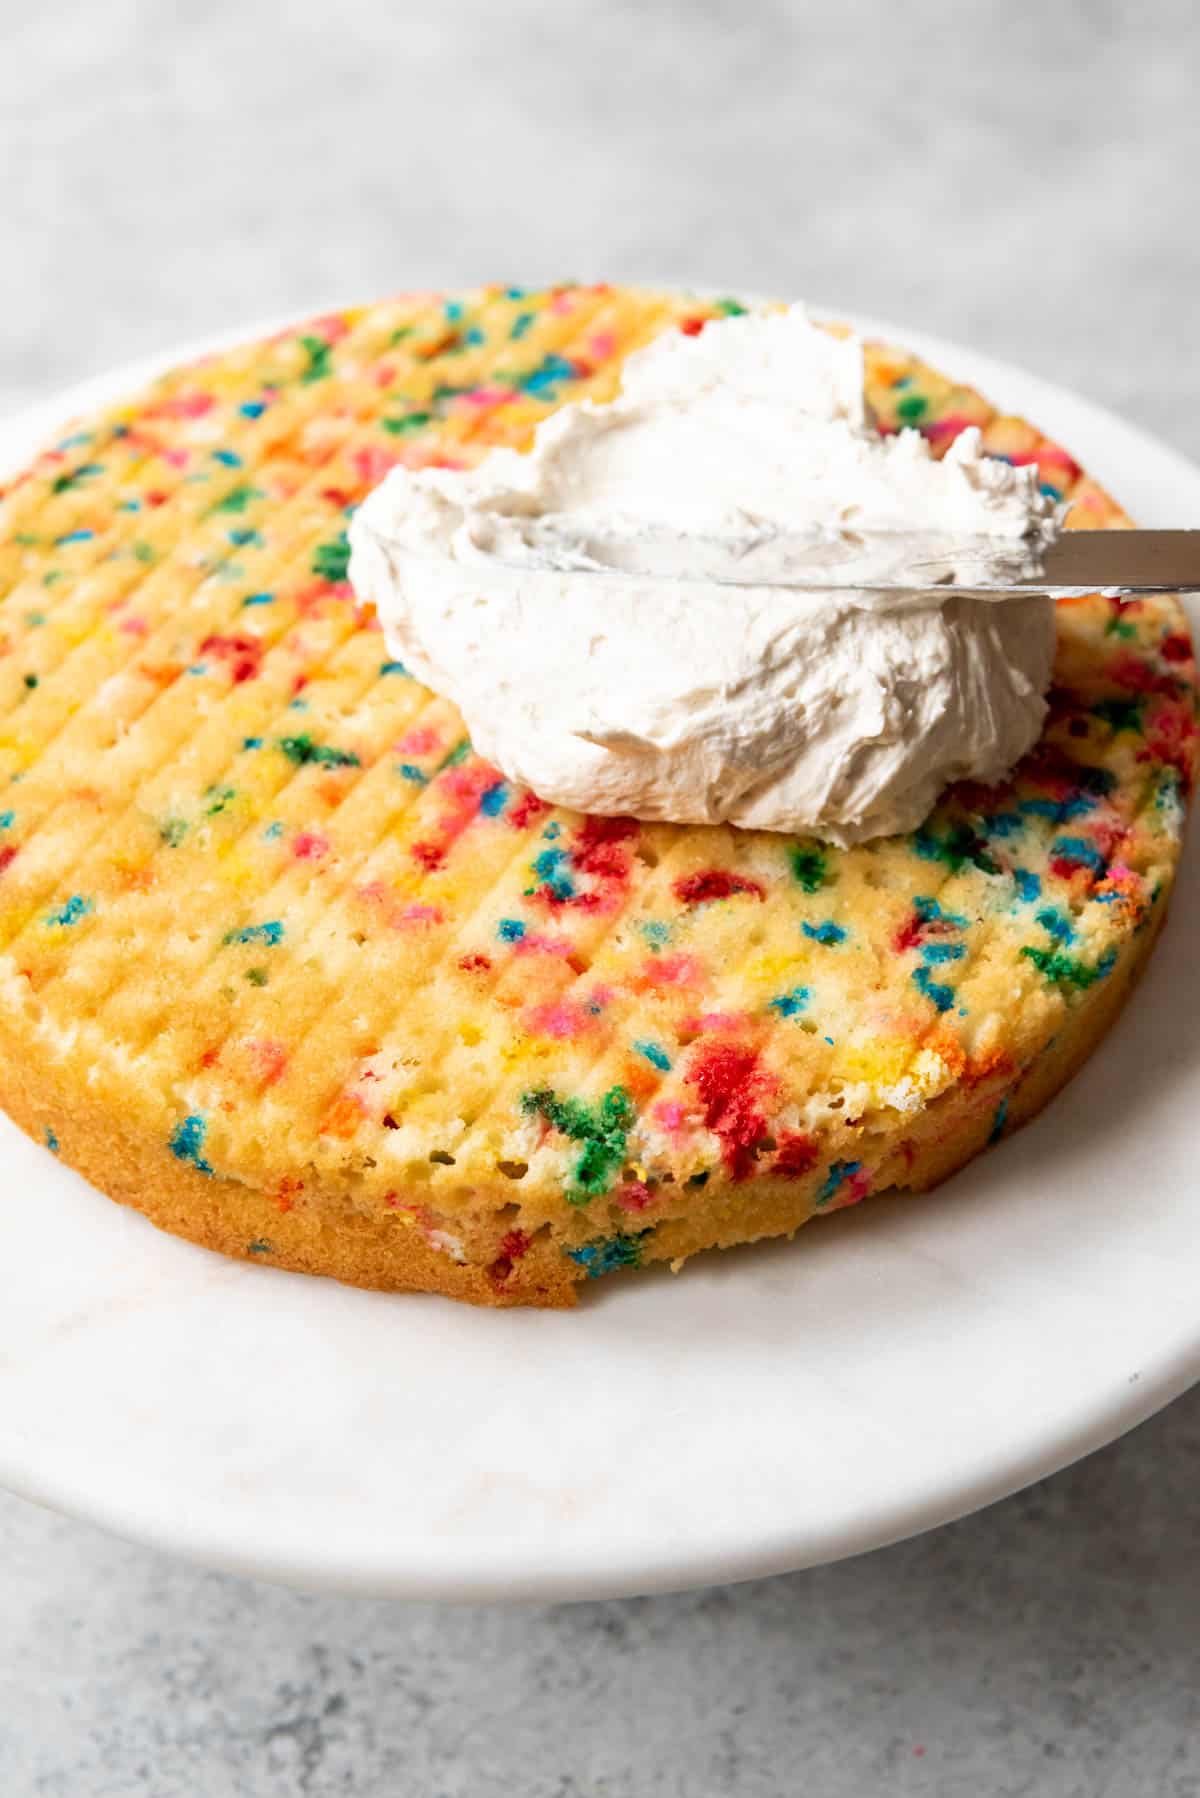 An image of Homemade funfetti round cake with a scoop of frosting on it ready to be spread.